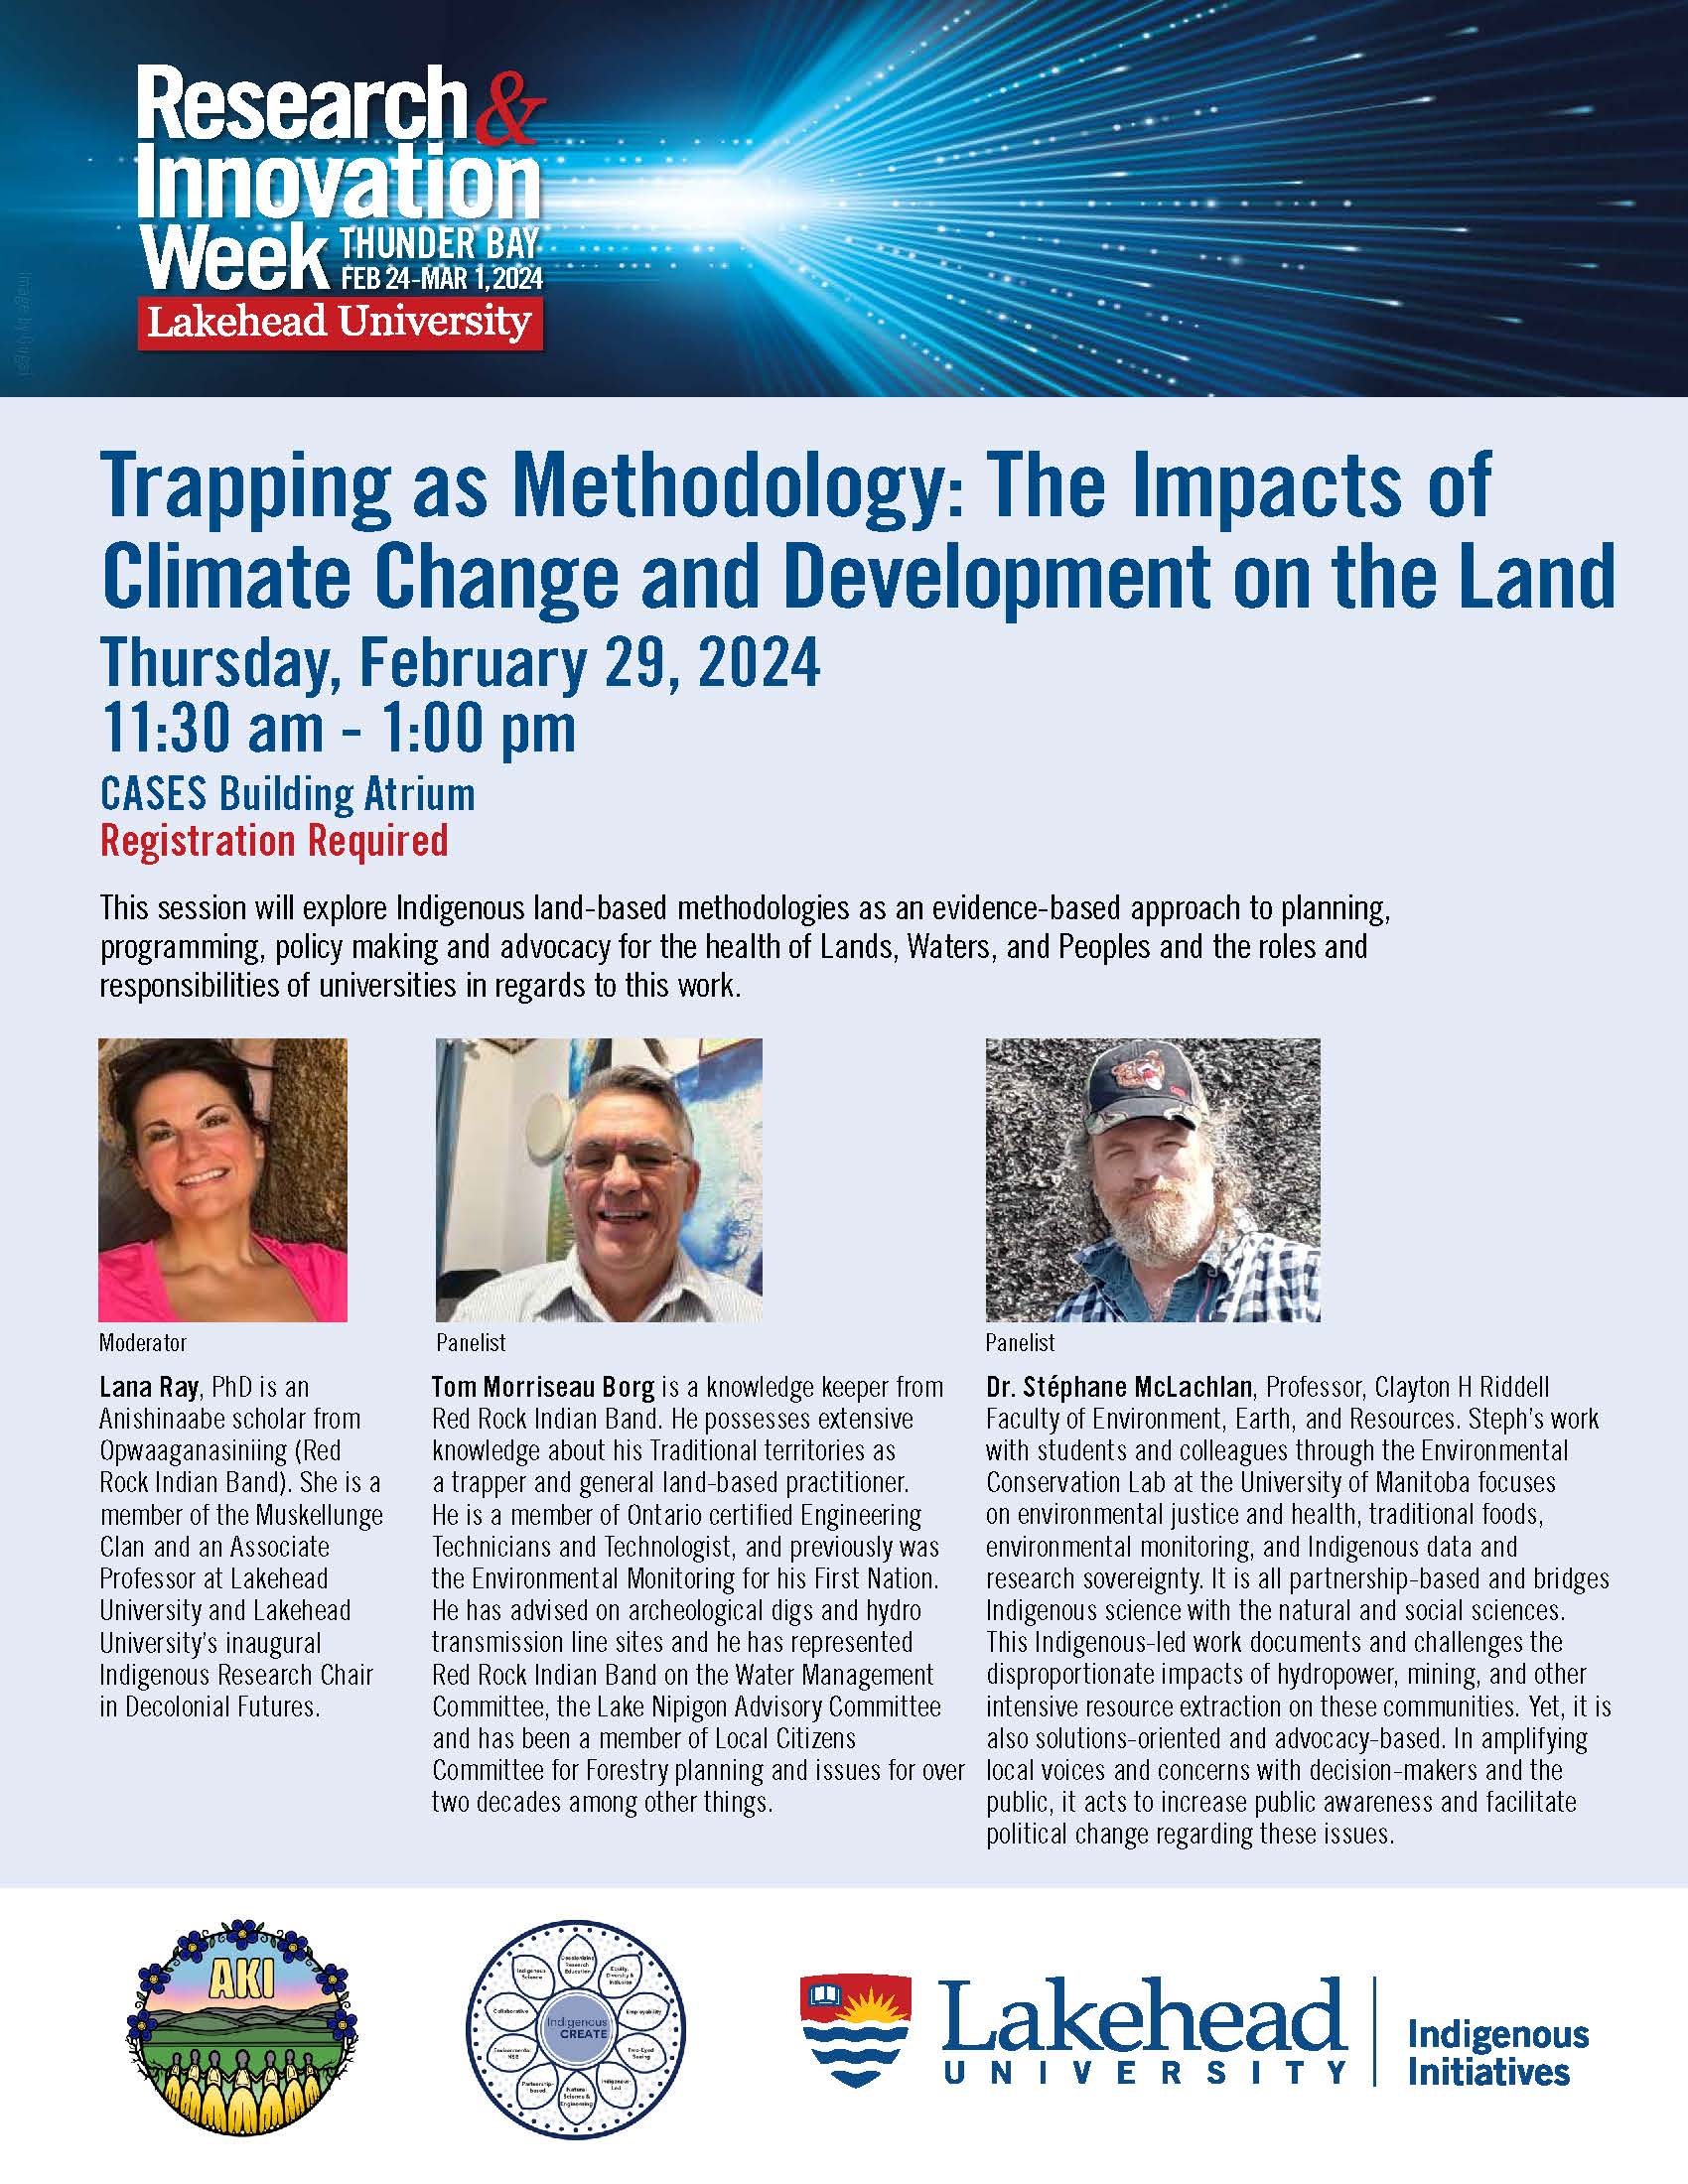 Event Poster for: Trapping as Methodology: The Impacts of Climate Change and Development on the Land